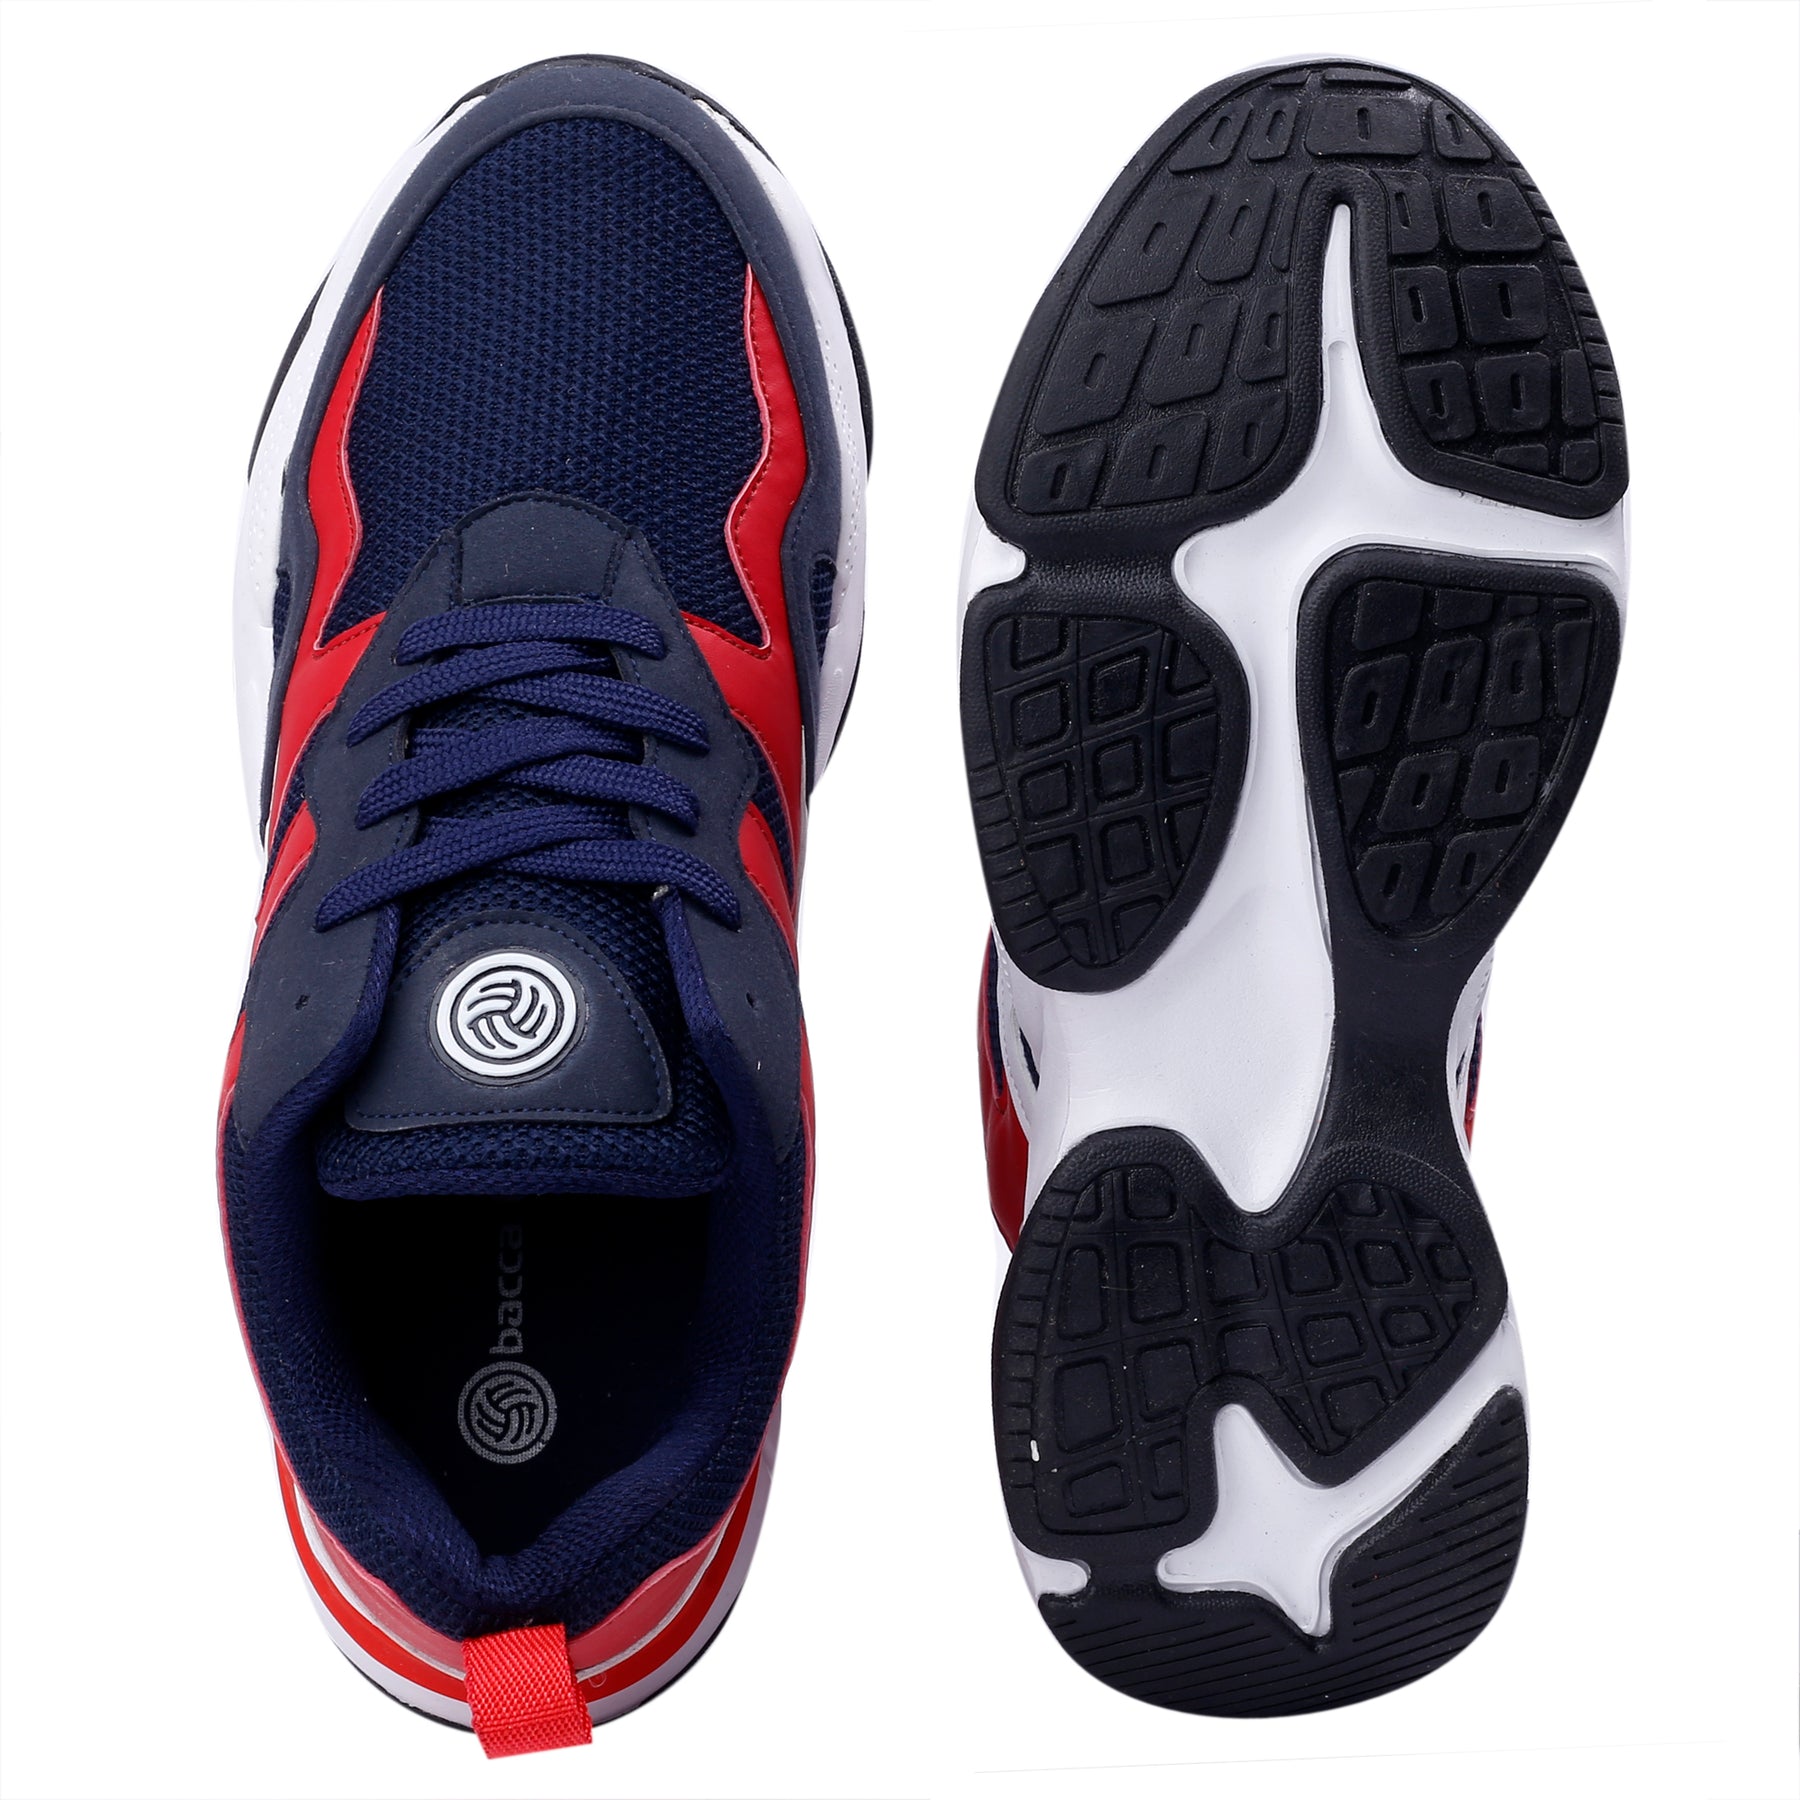 running shoes, best running shoes, sports shoes, red running shoes, gym shoes